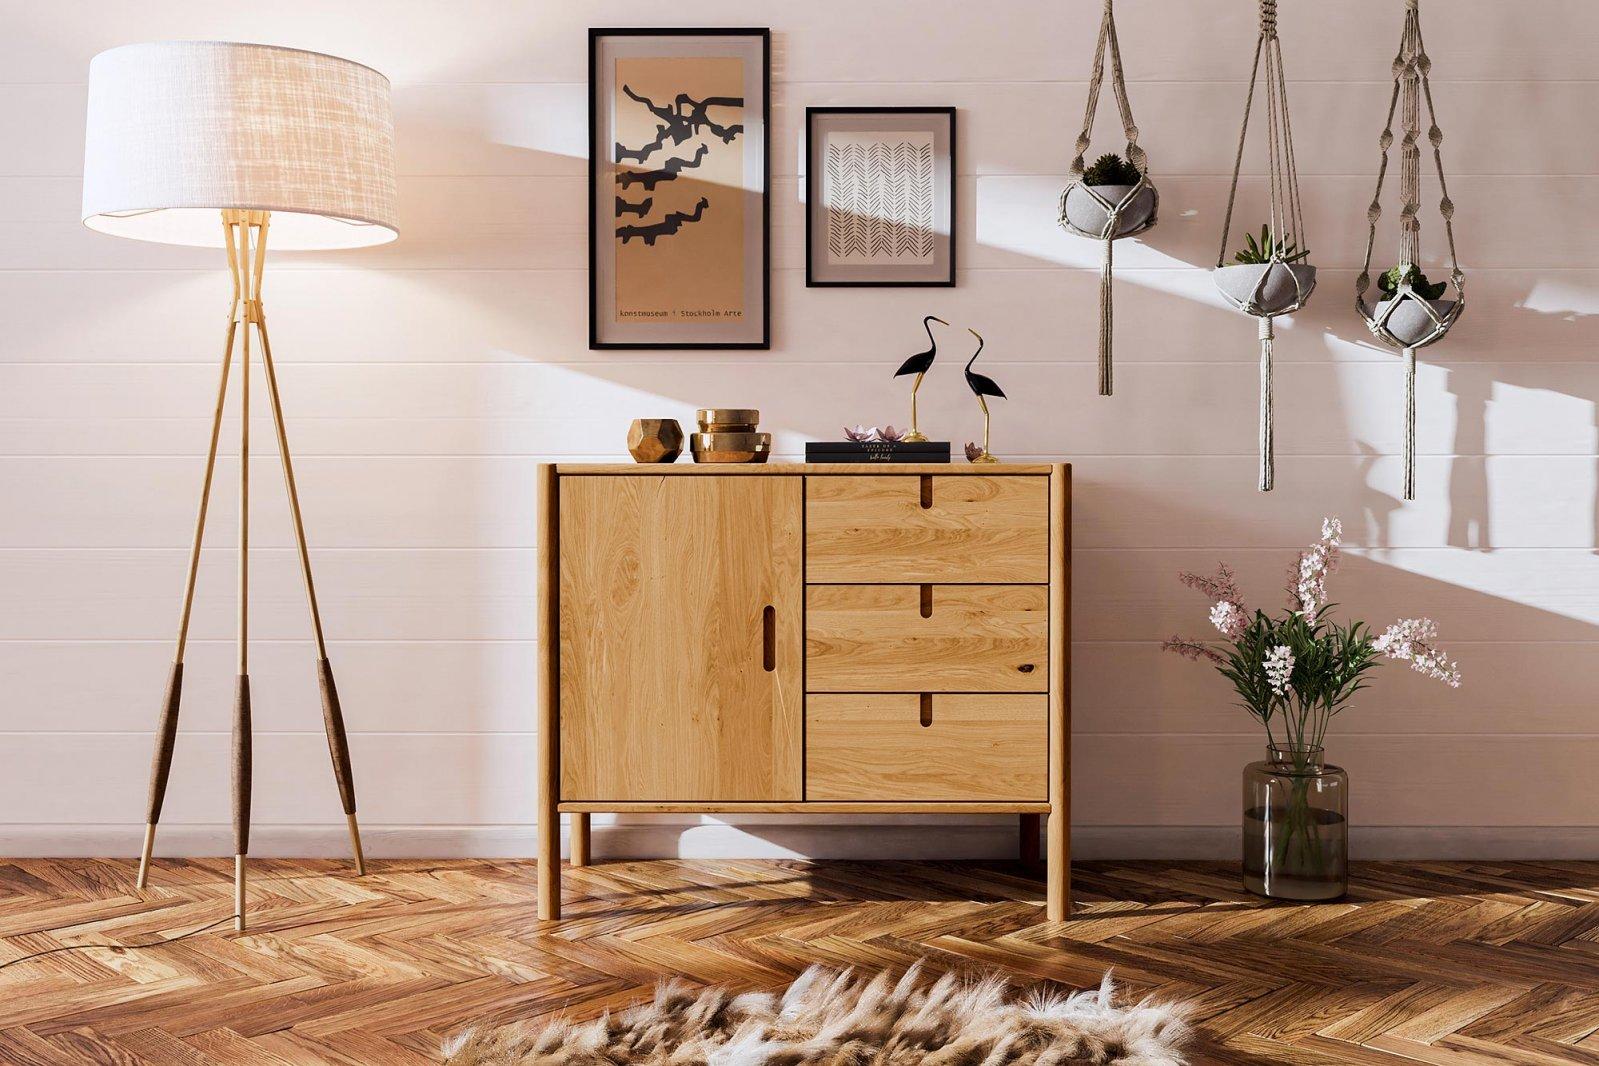 Chest of drawers POLA